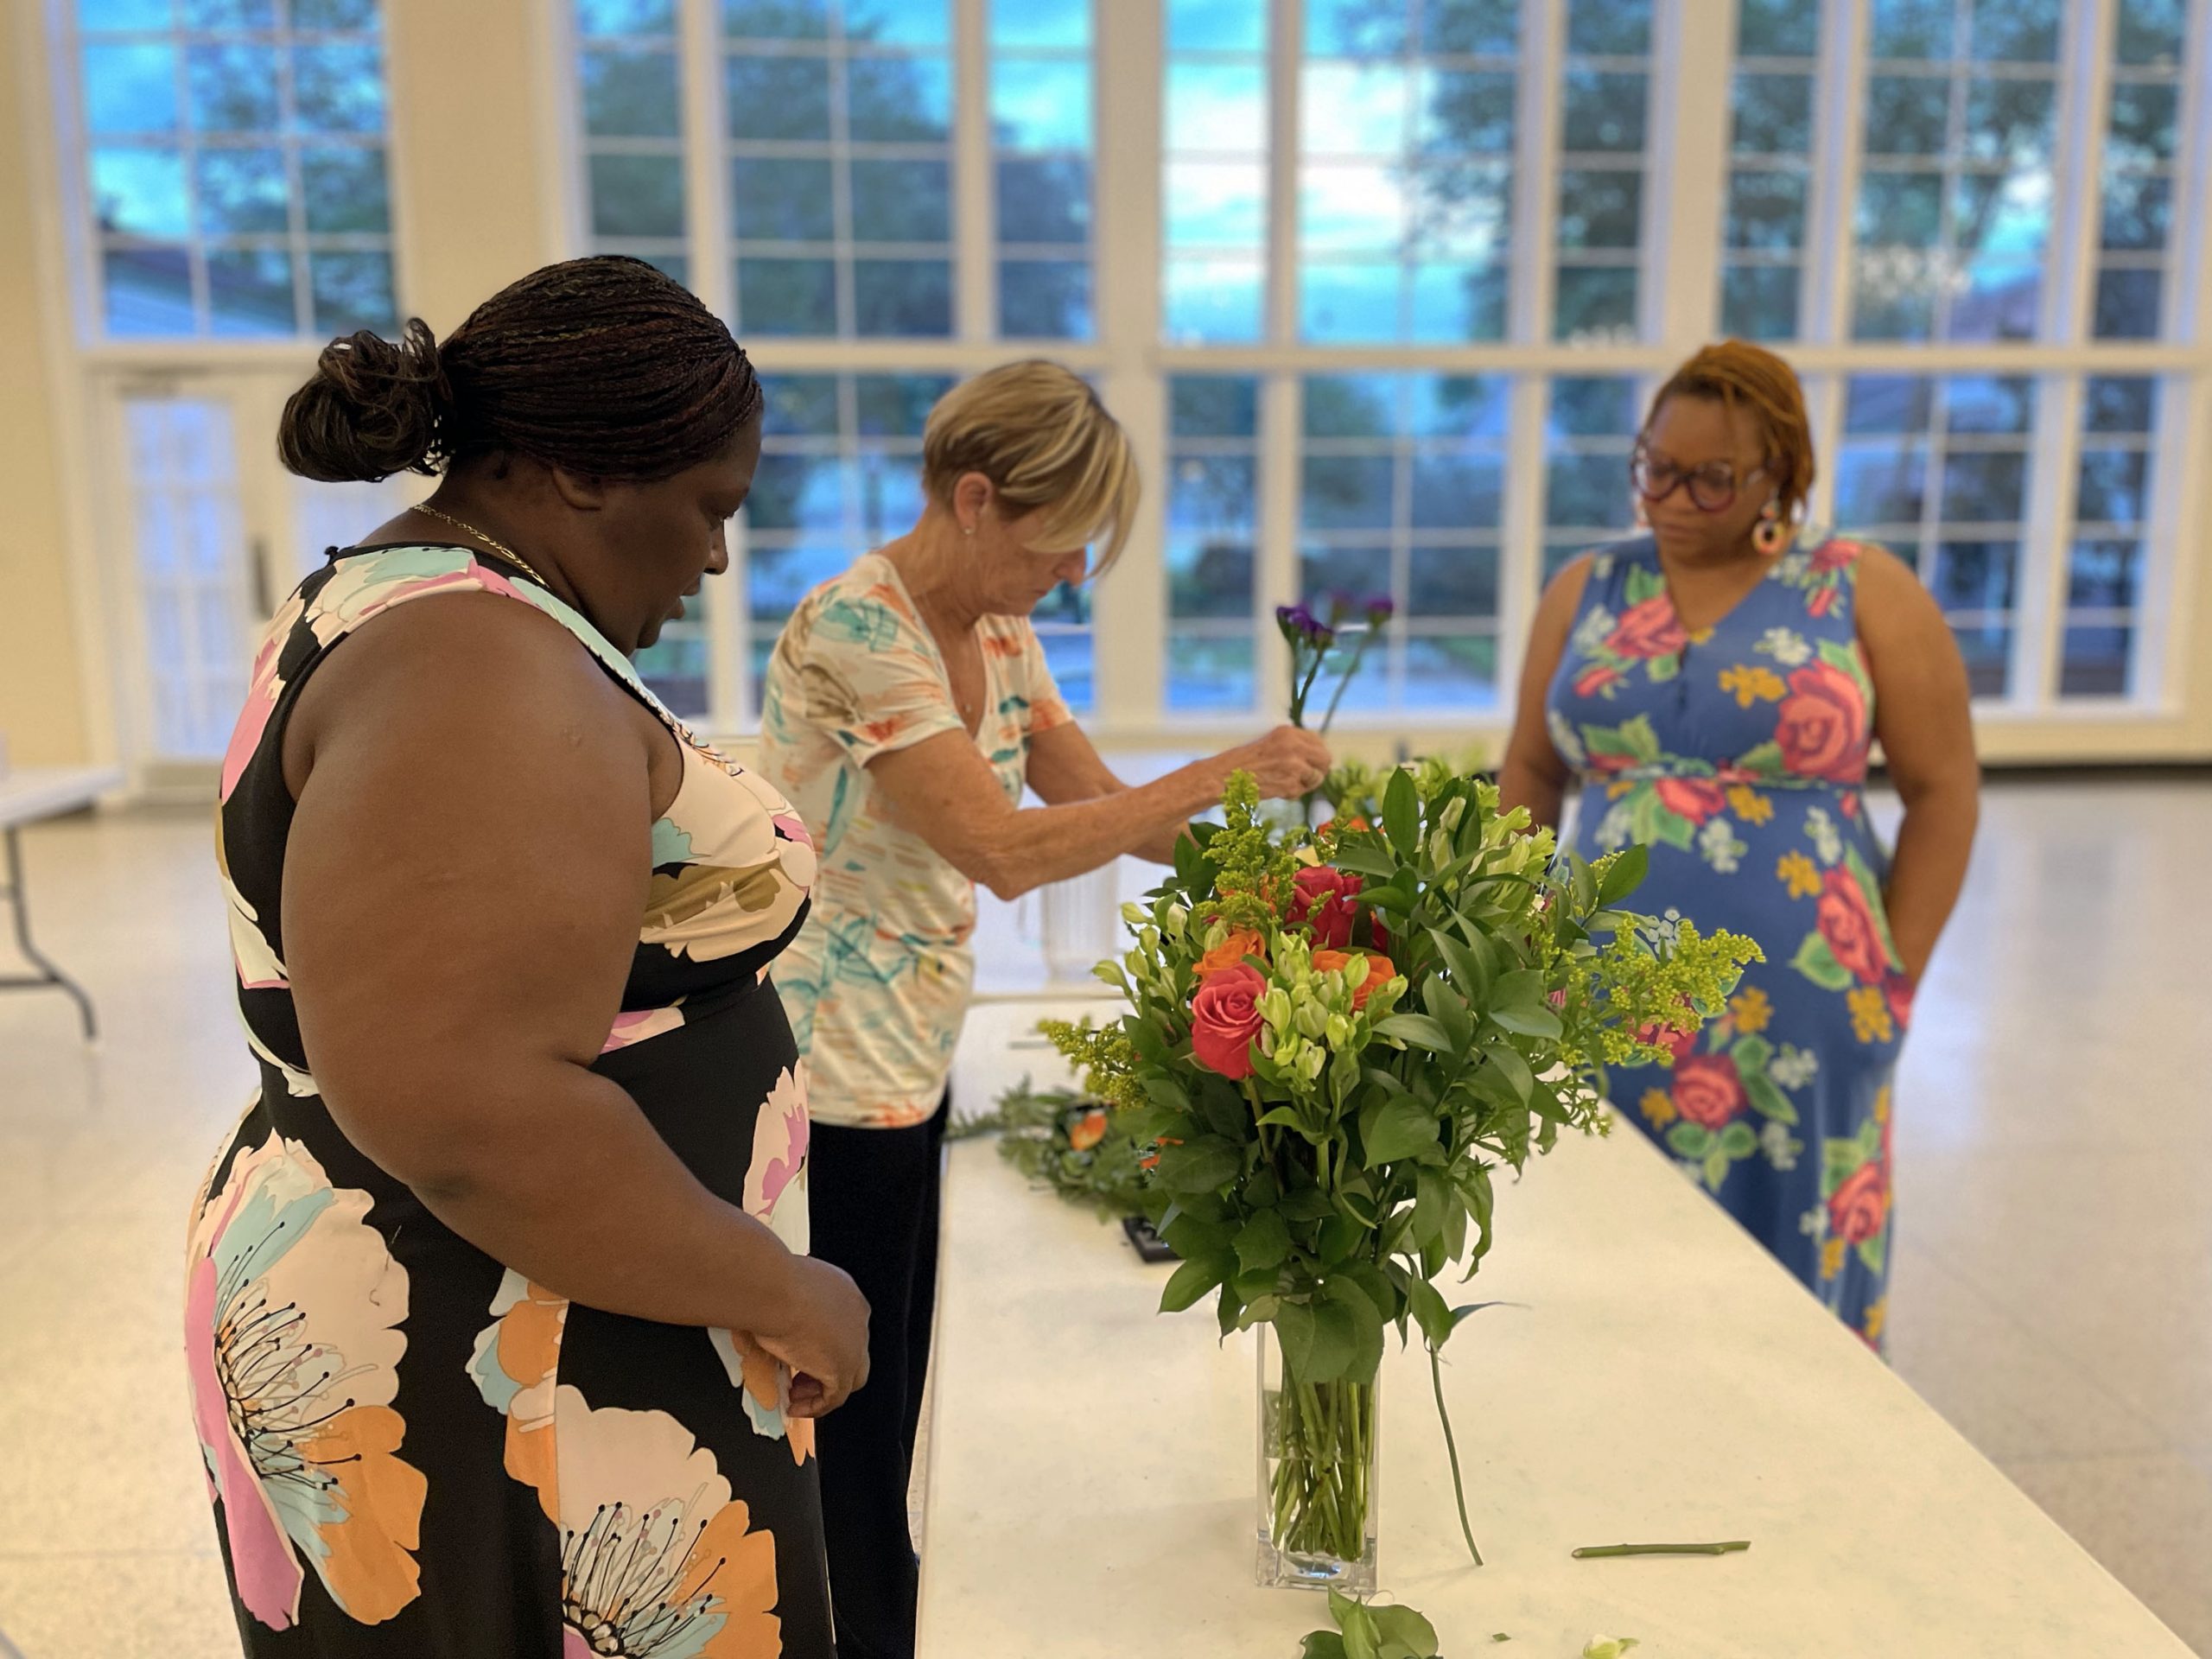 Two guests and the instructor create flower arrangements